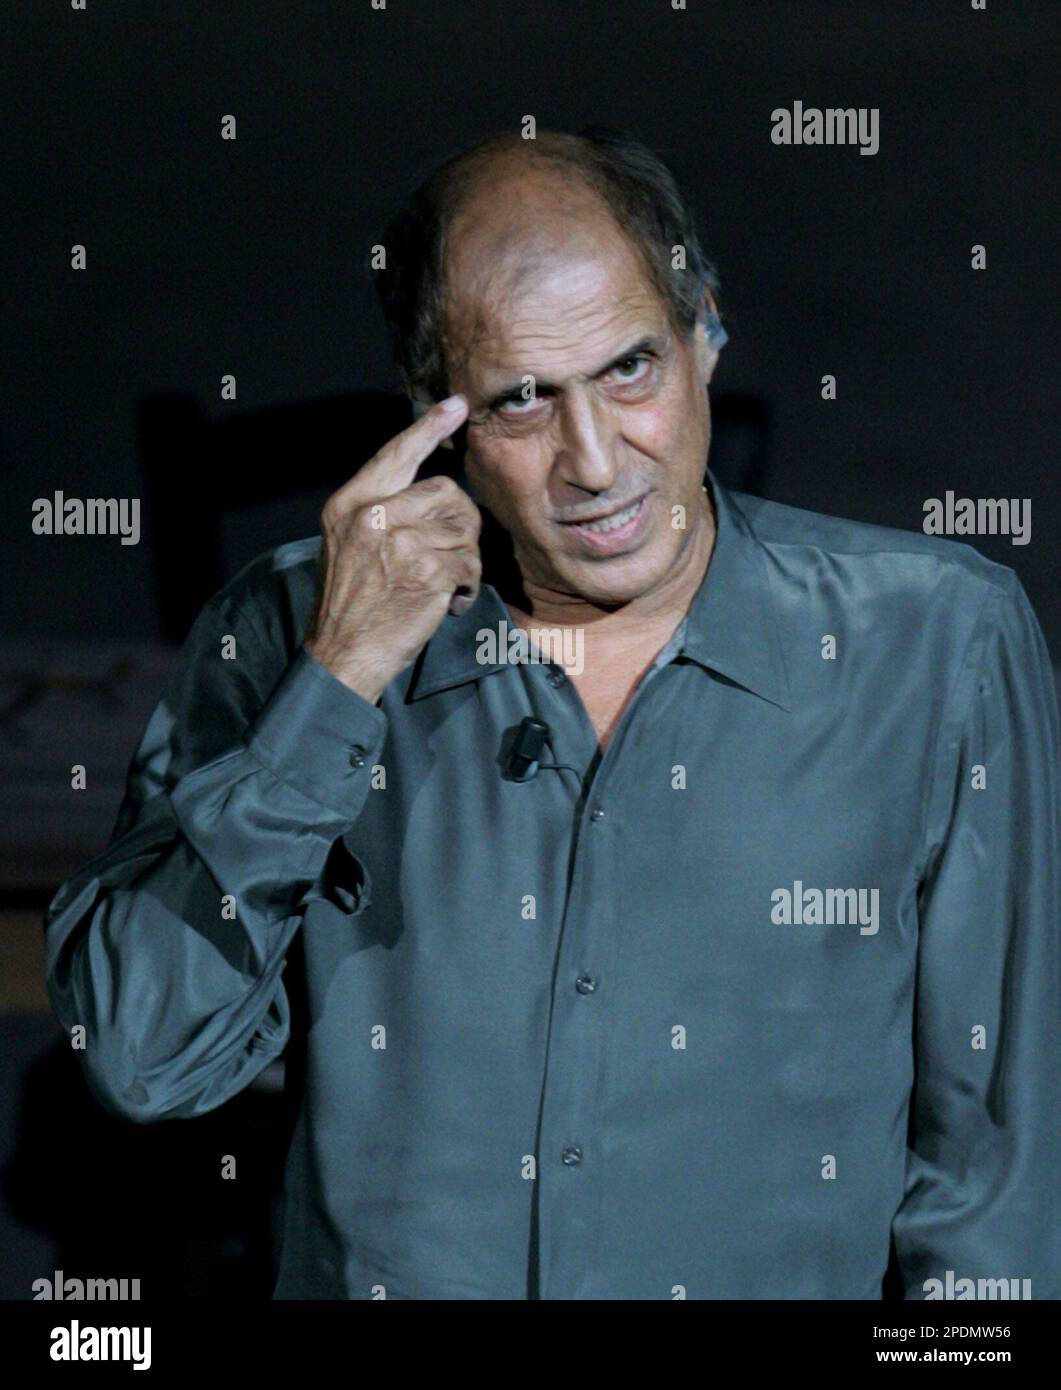 Adriano Celentano gestures during his monologue at the 'Rockpolitick' Rai tv  show, in Brugherio, northern Italy, Thursday, Oct. 20, 2005. The famous  Italian rockstar and actor caused a media stir with his